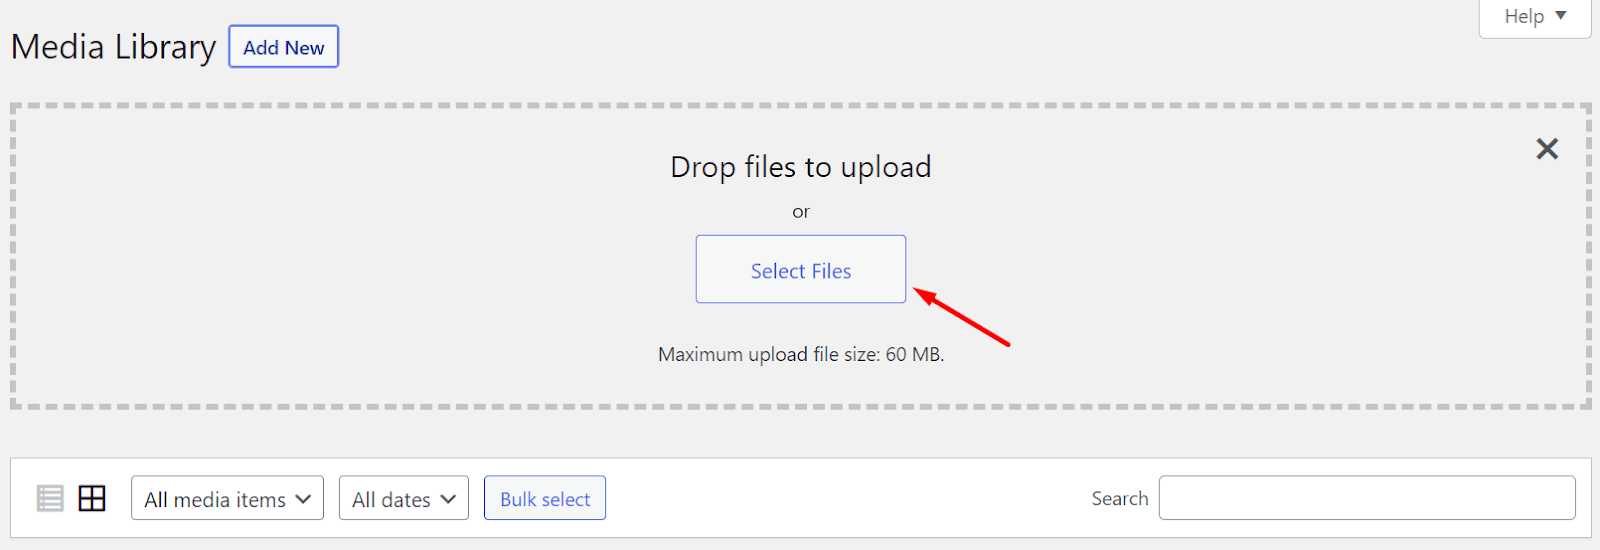 Select image files to upload